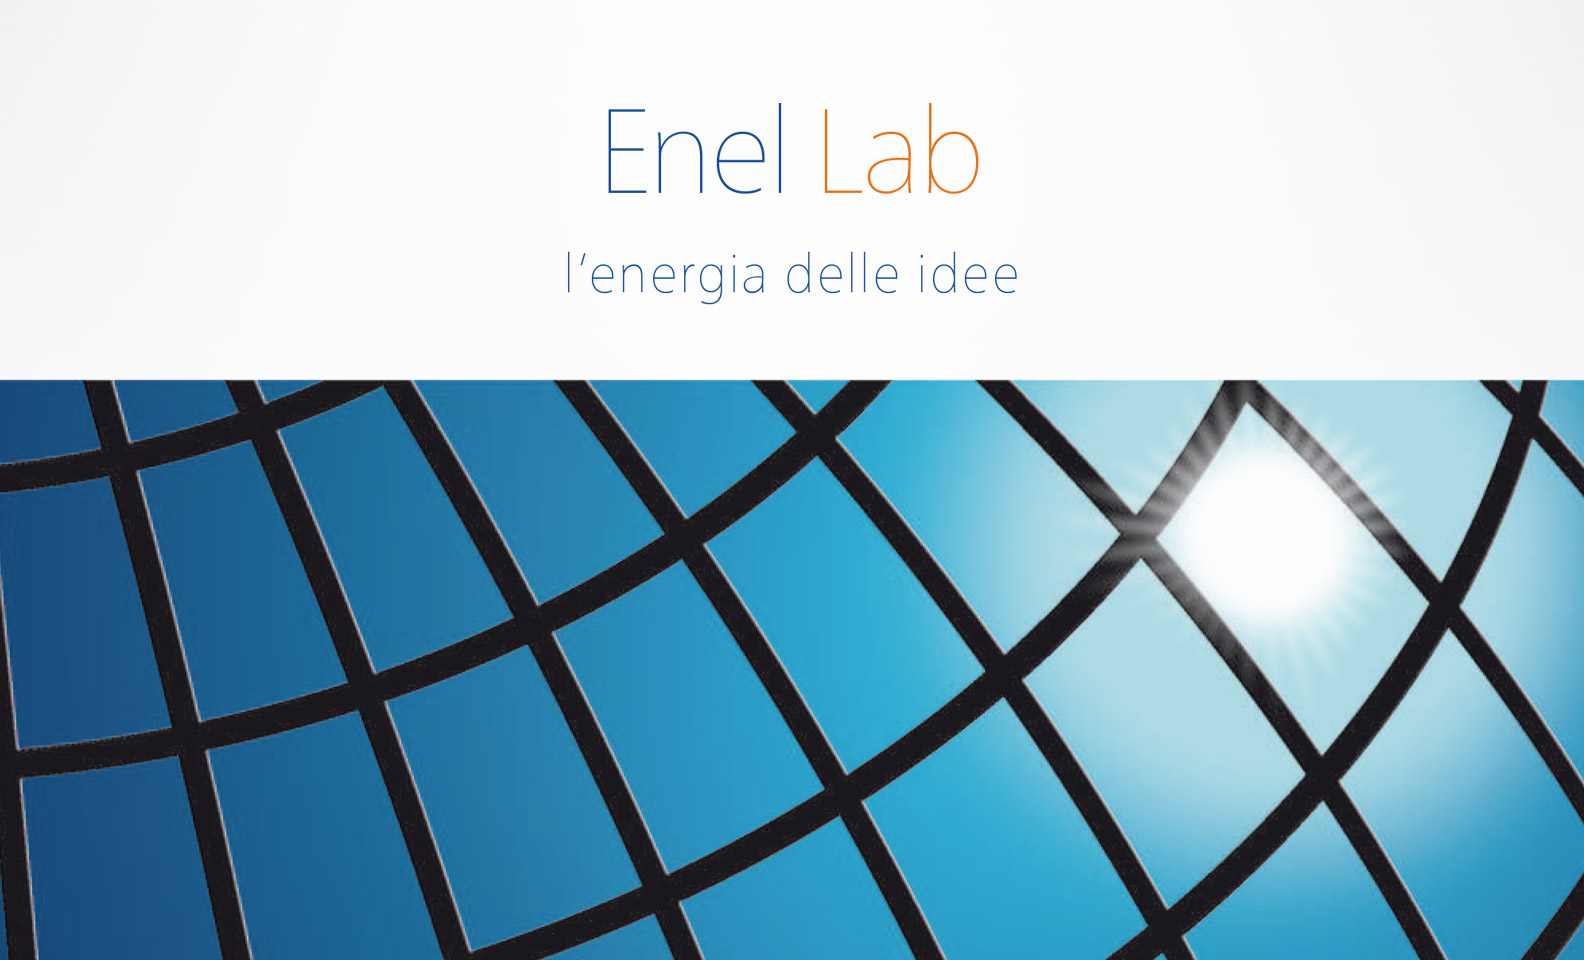 Enel Lab: after one year, results are more than positive, Enel Group